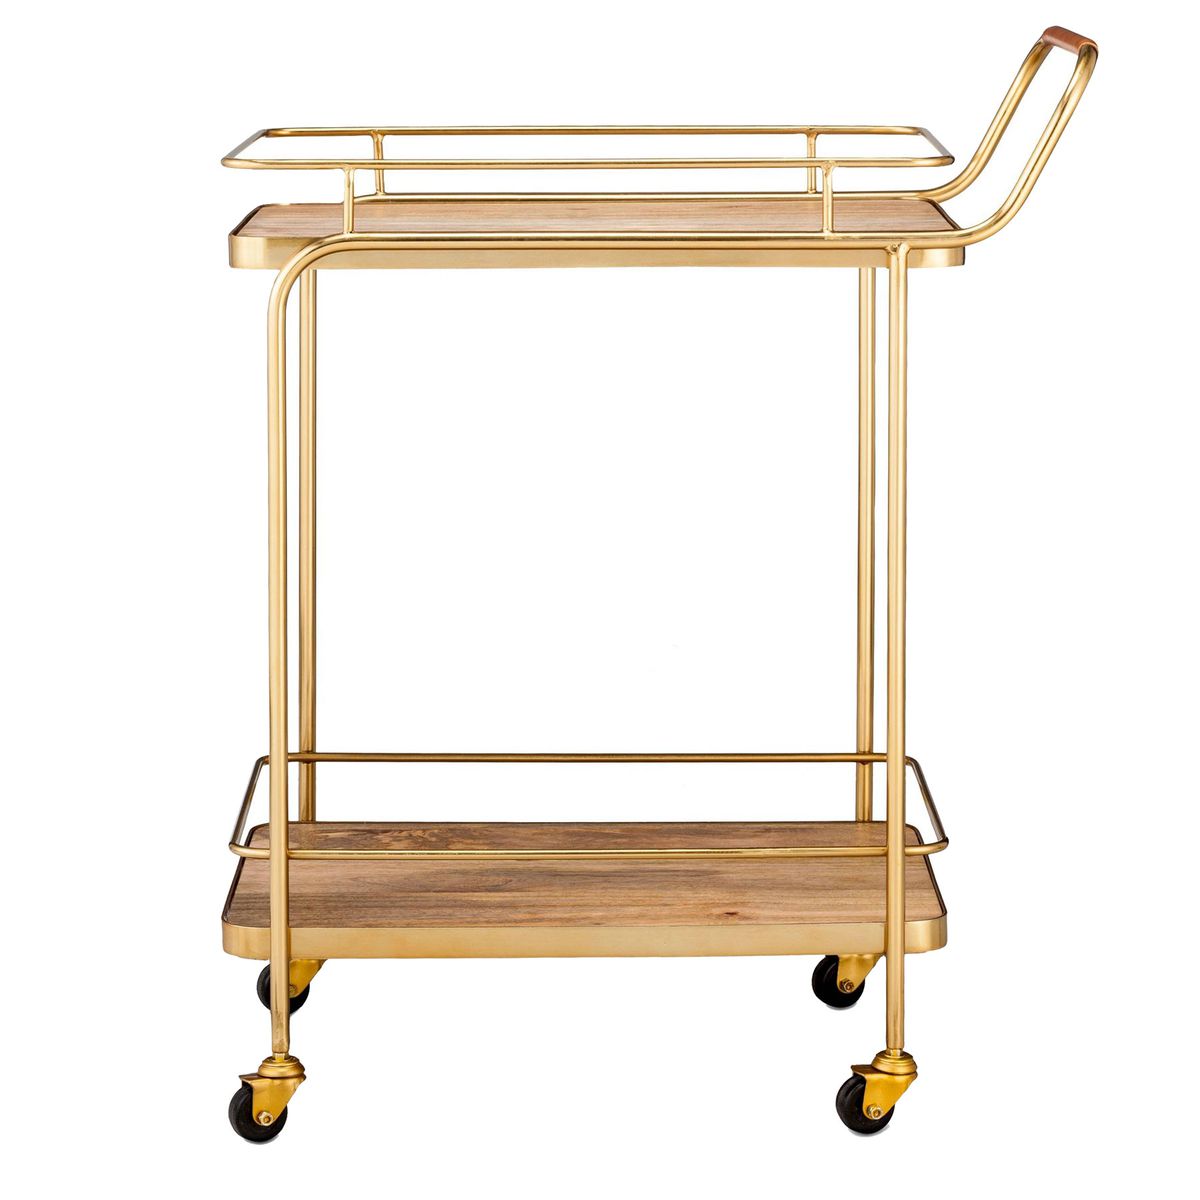 Metal, Wood, and Leather Bar Cart